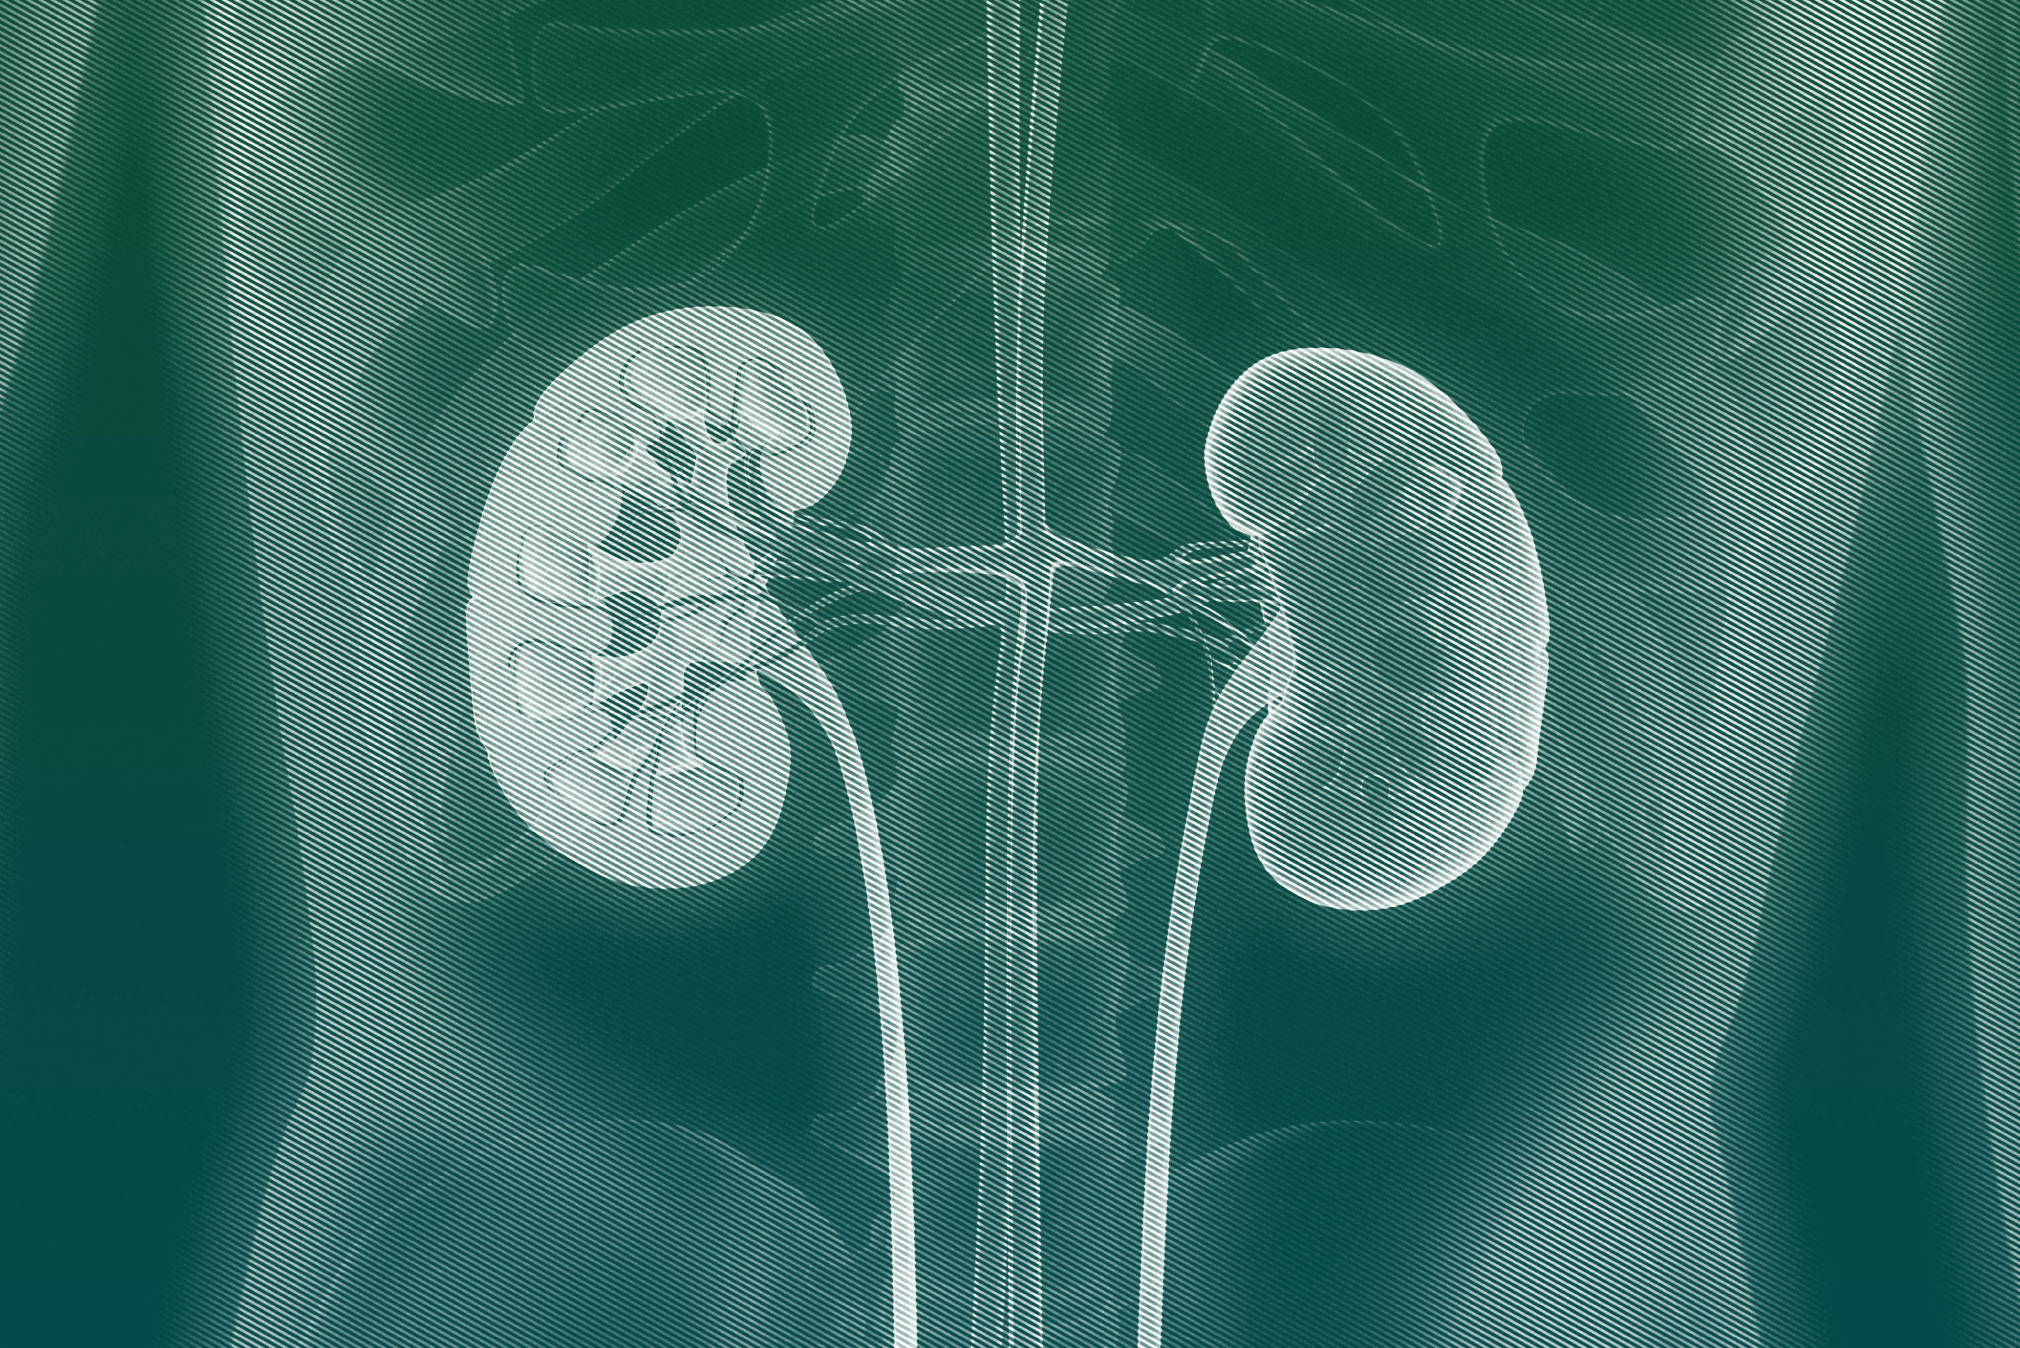 Luminary Labs to support KidneyX